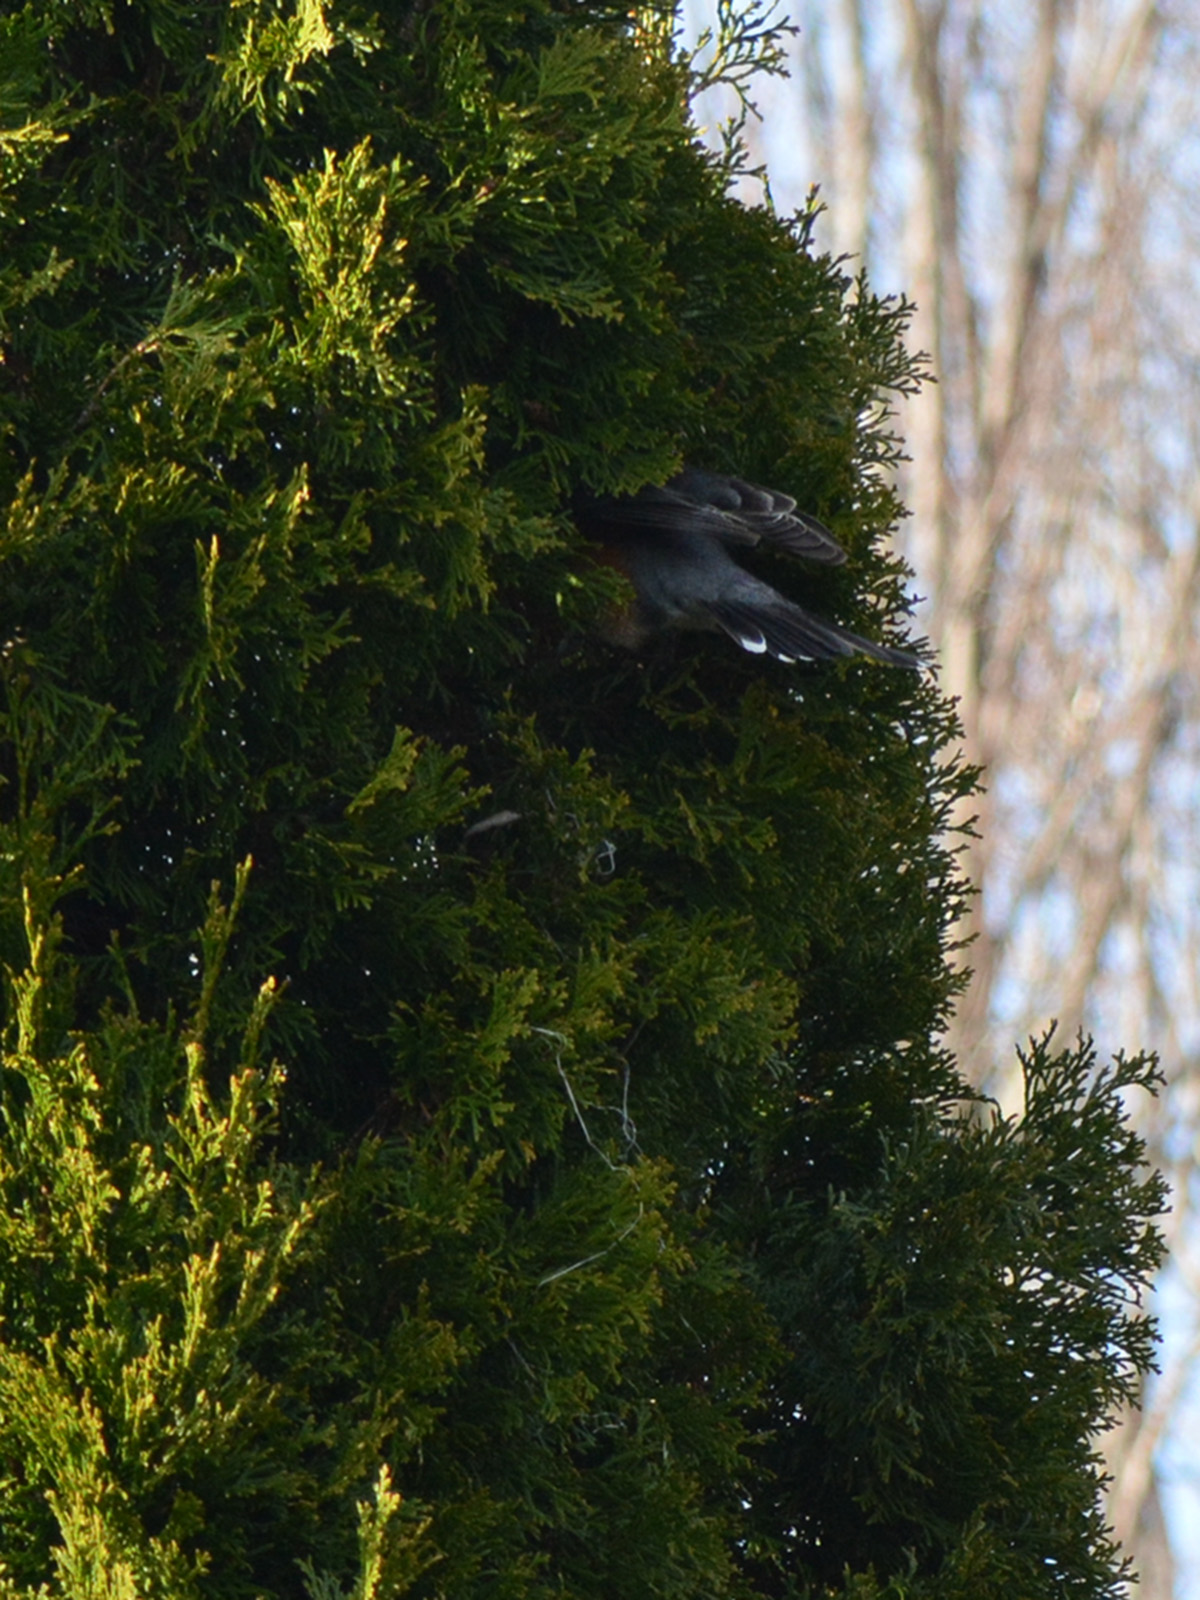 Robin diving into the arborvitae with nesting materials